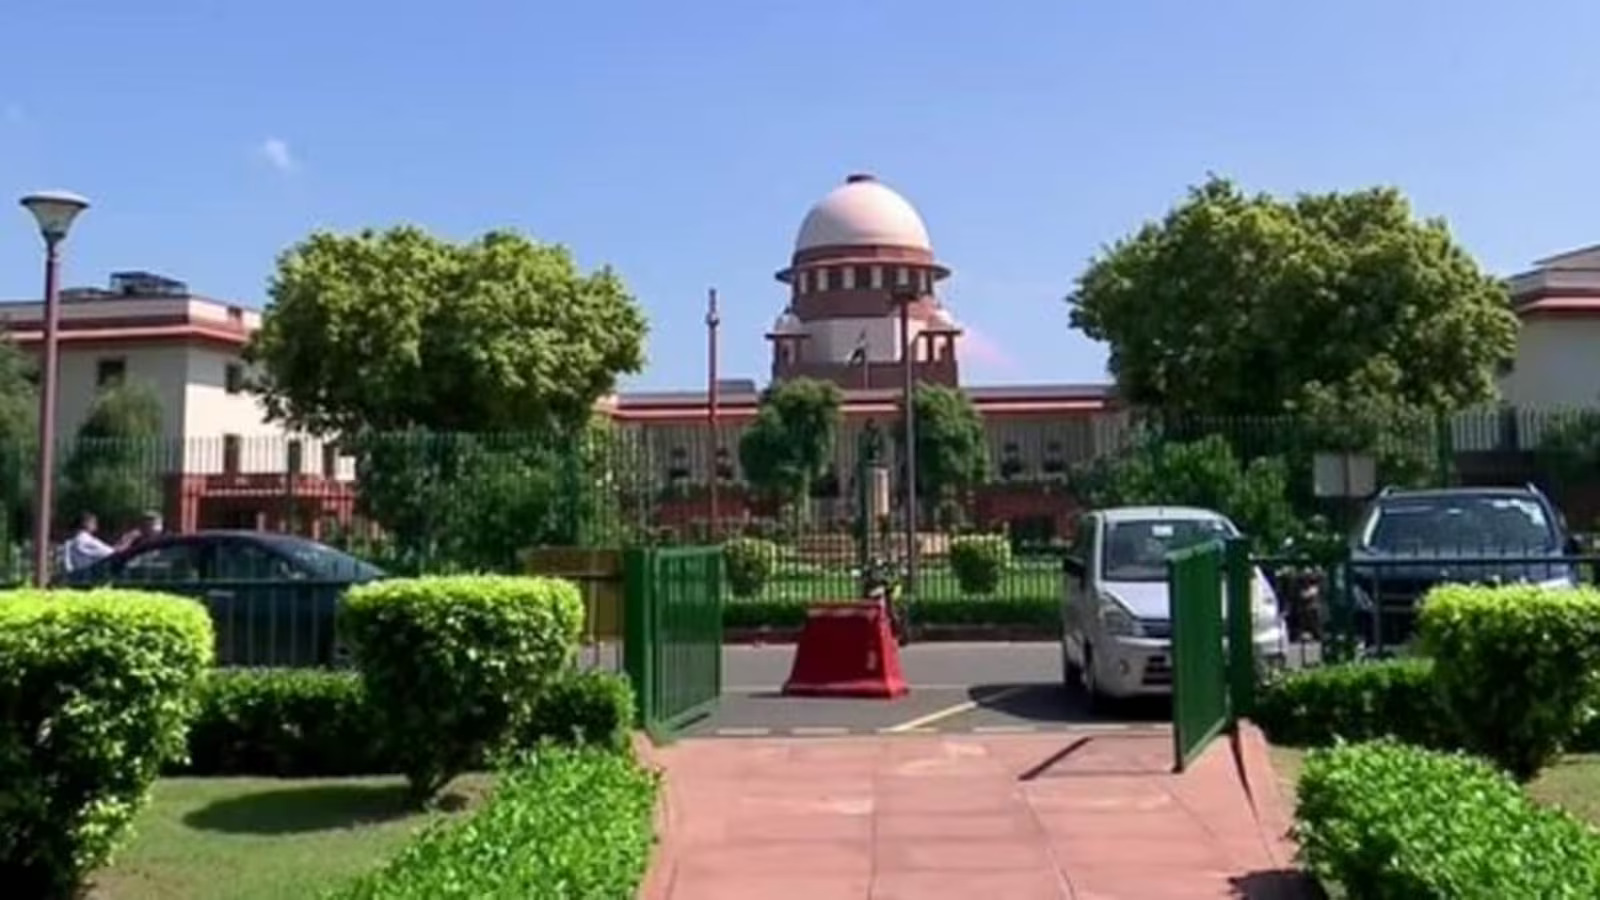 SC Reserves Verdict on Woman’s Plea to Terminate 26-Week Pregnancy Amid Medical and Legal Complexities